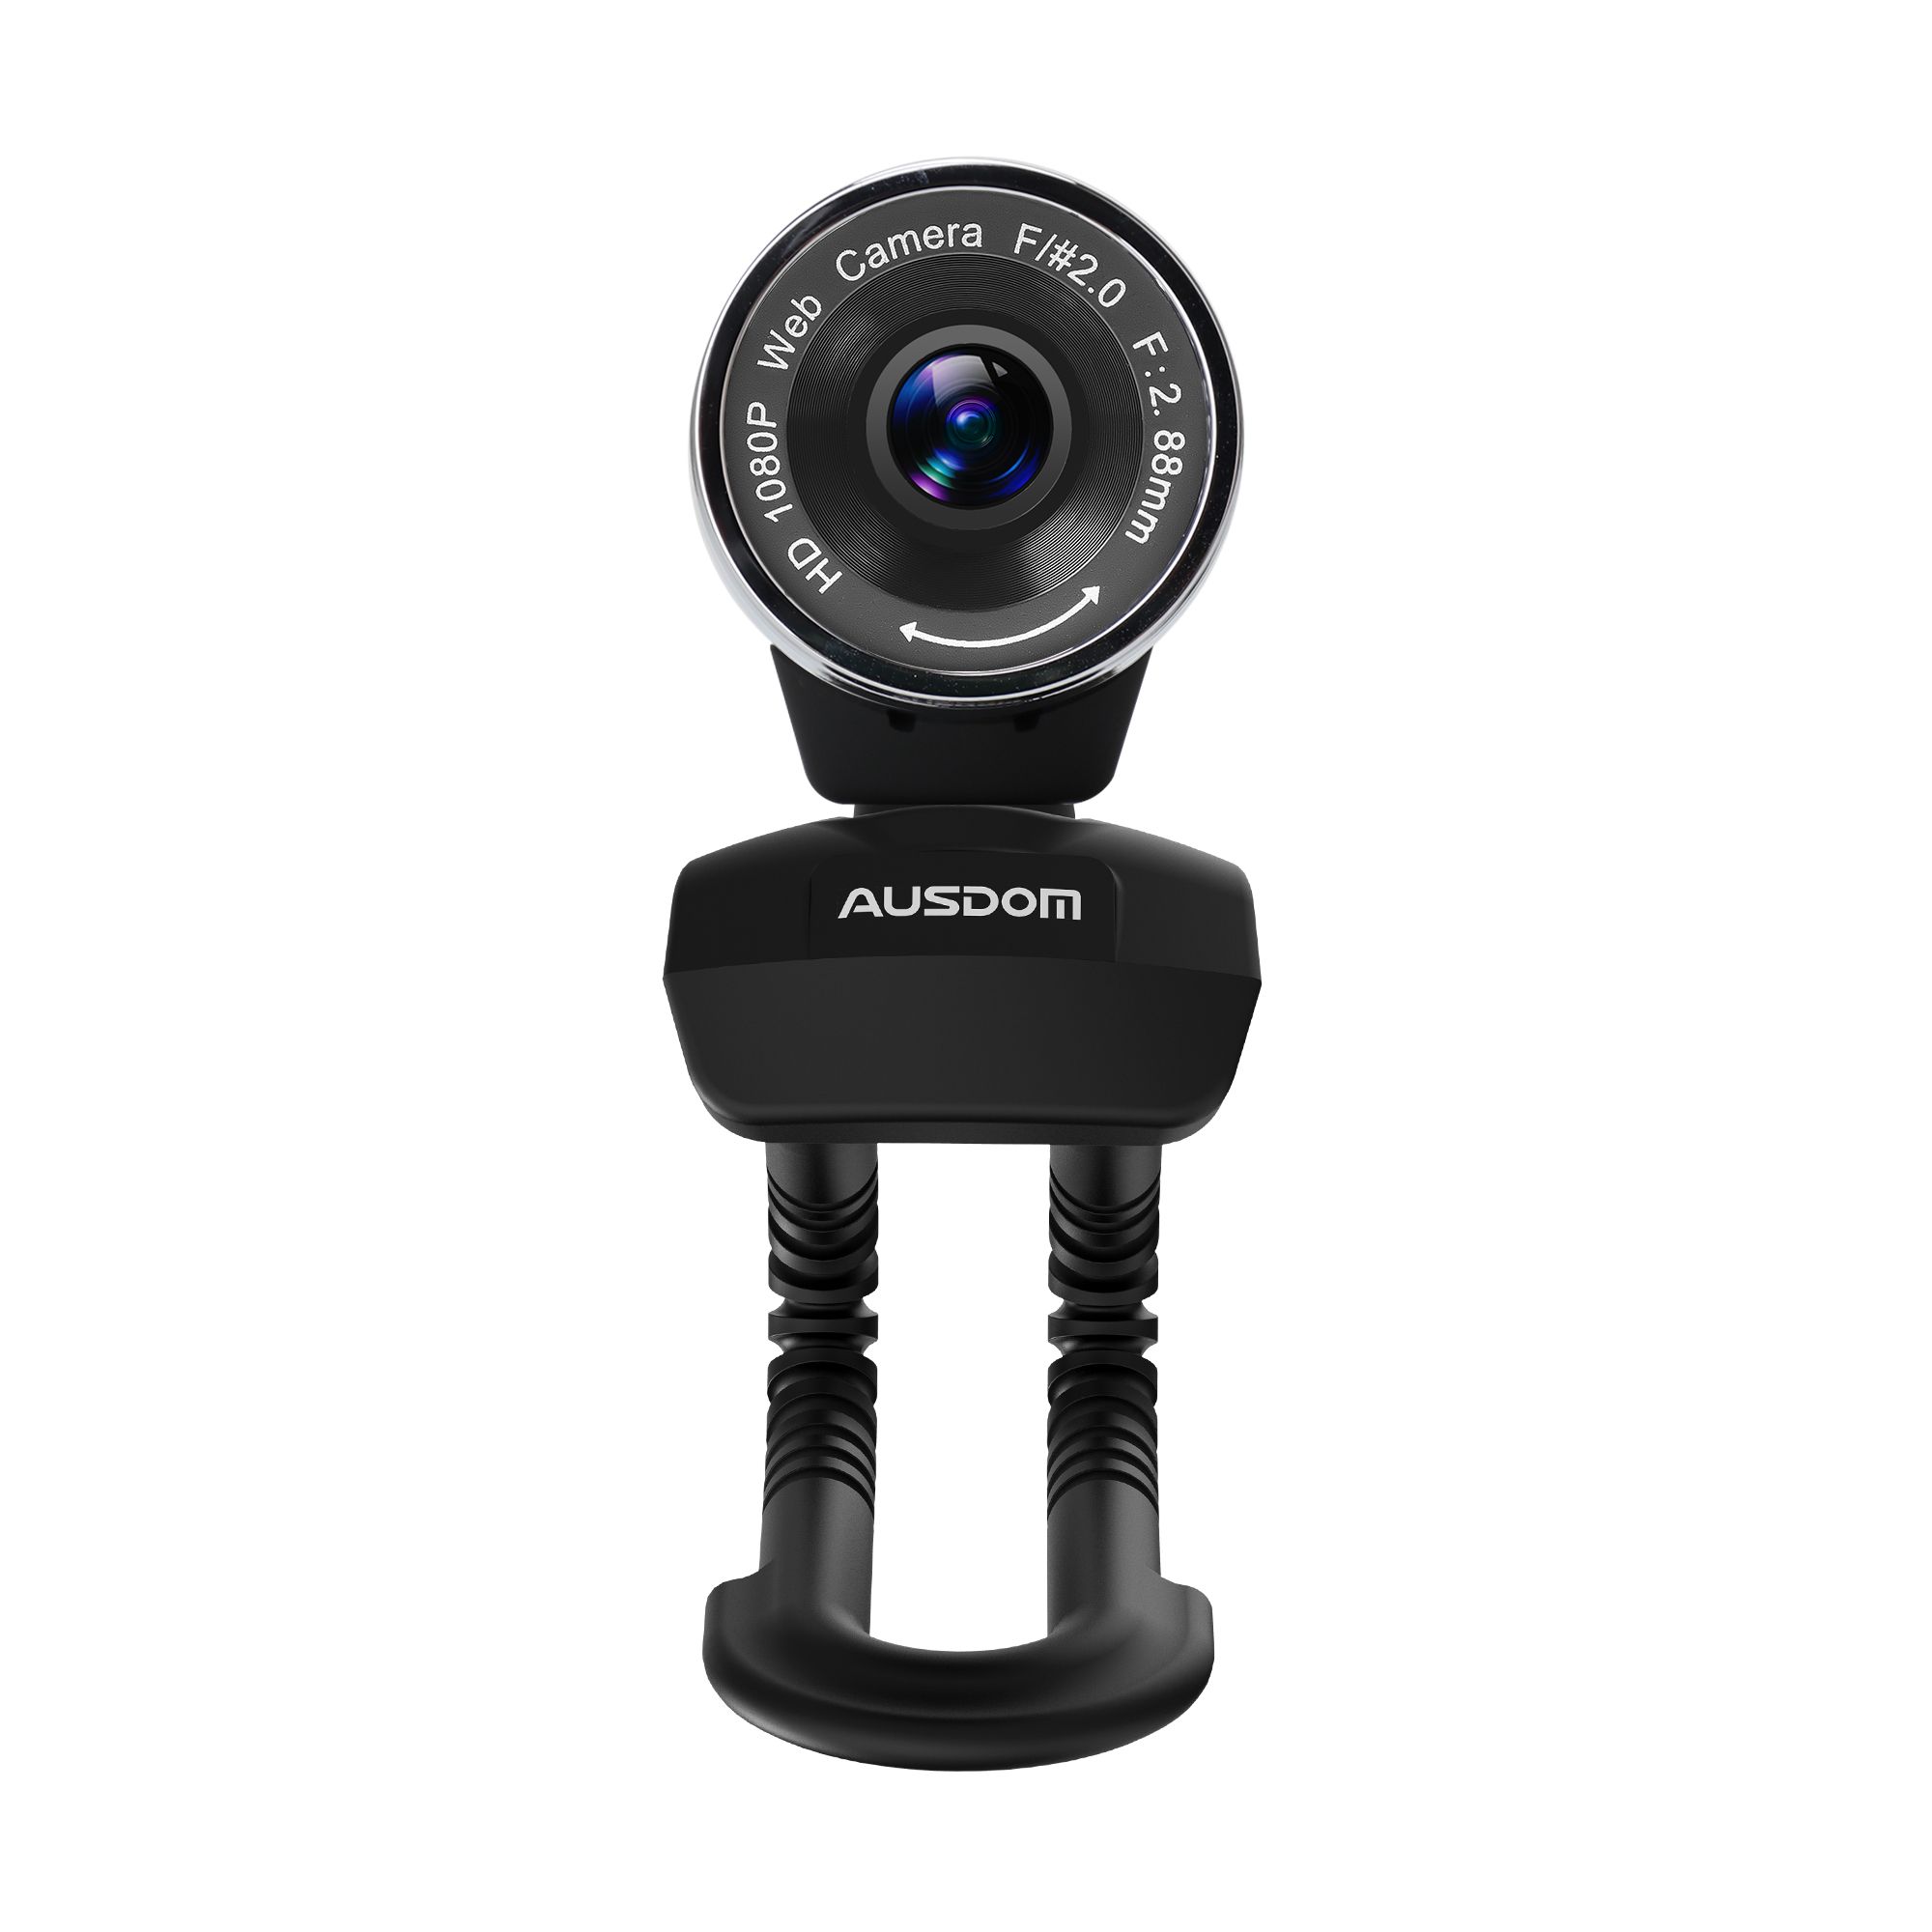 Full HD 1080P Wide Angle View Webcam with Anti-distortion, AUSDOM AW61